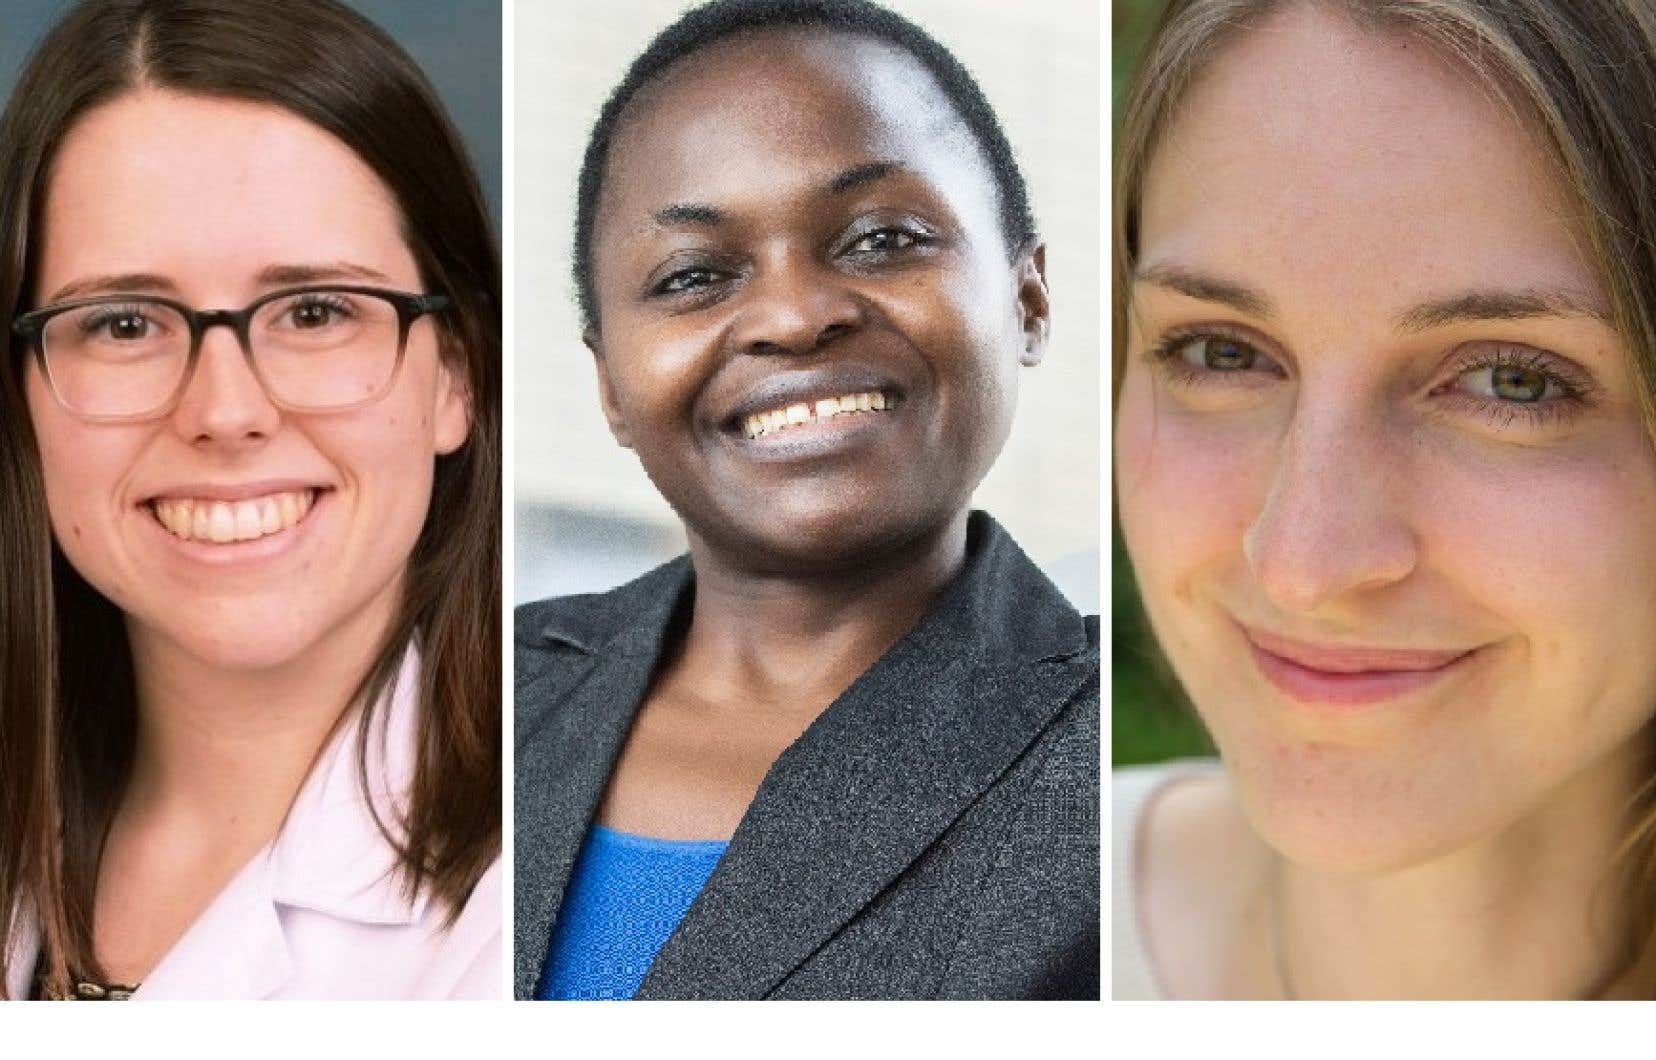 Photos of three scholarship recipients from the New Fund for Women in Science at UQAM

